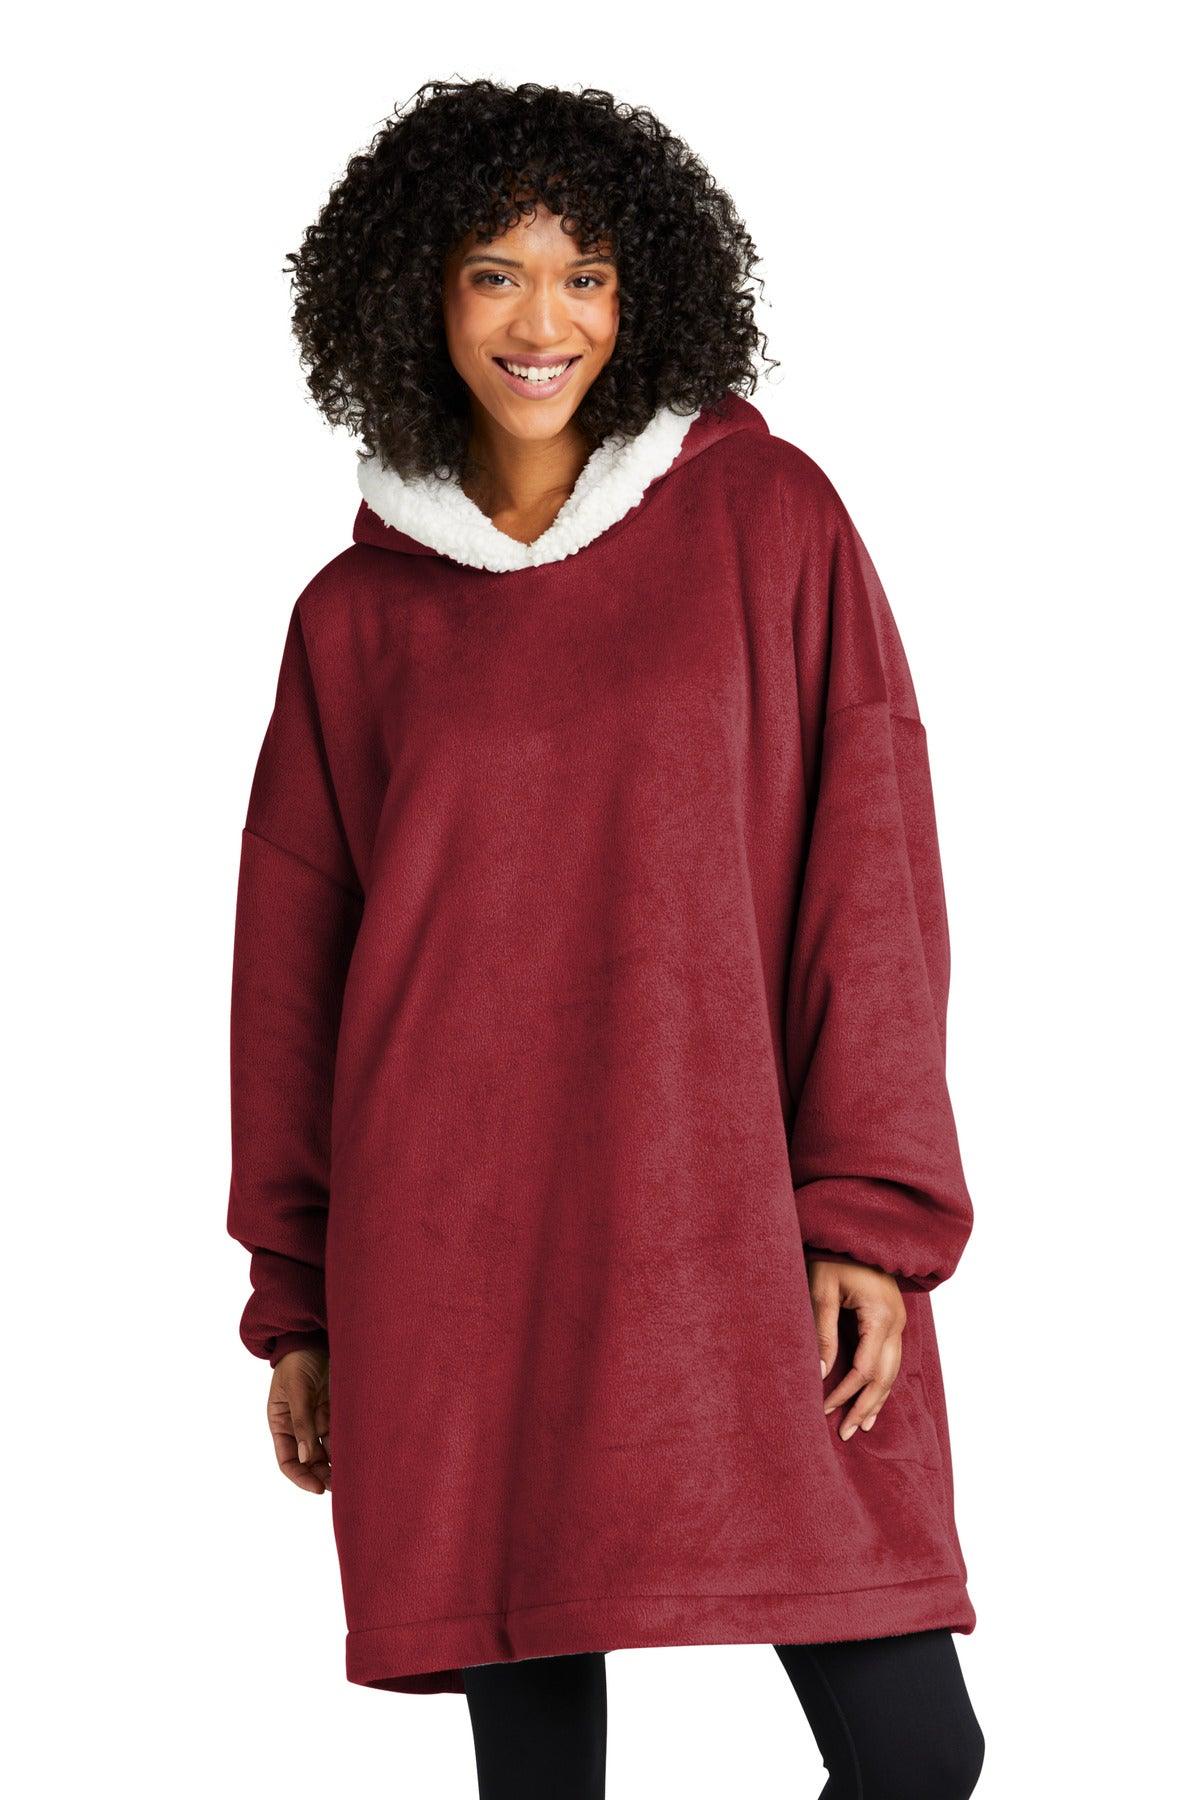 Port Authority Mountain Lodge Wearable Blanket BP41 - Dresses Max